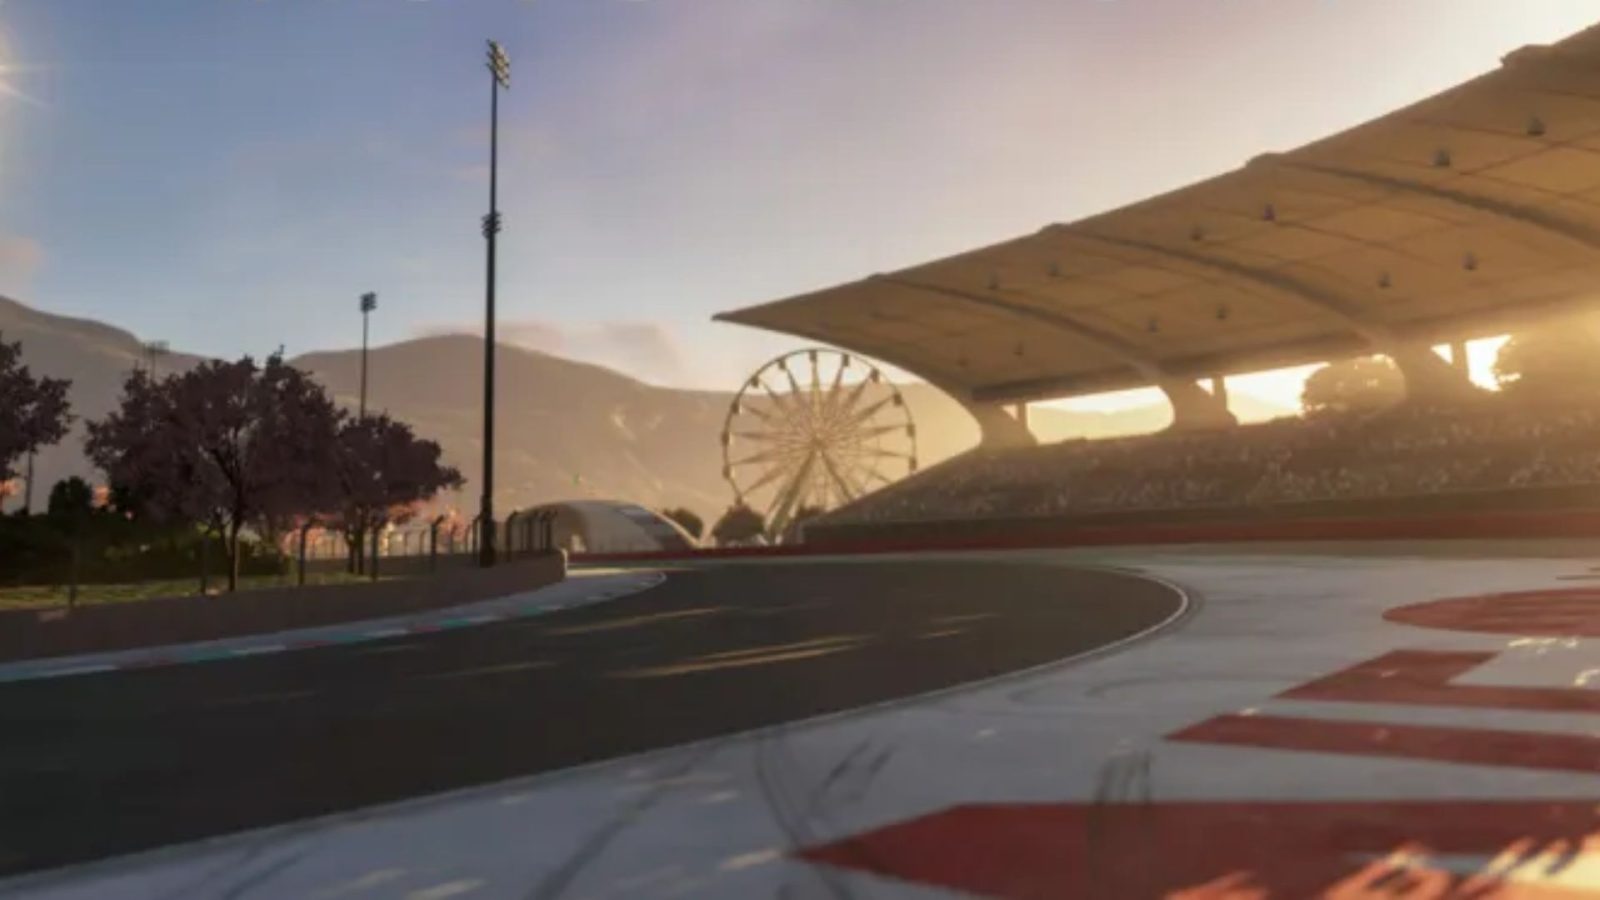 Forza Motorsport: Comprehensive List of Tracks So Far and Upcoming Additions